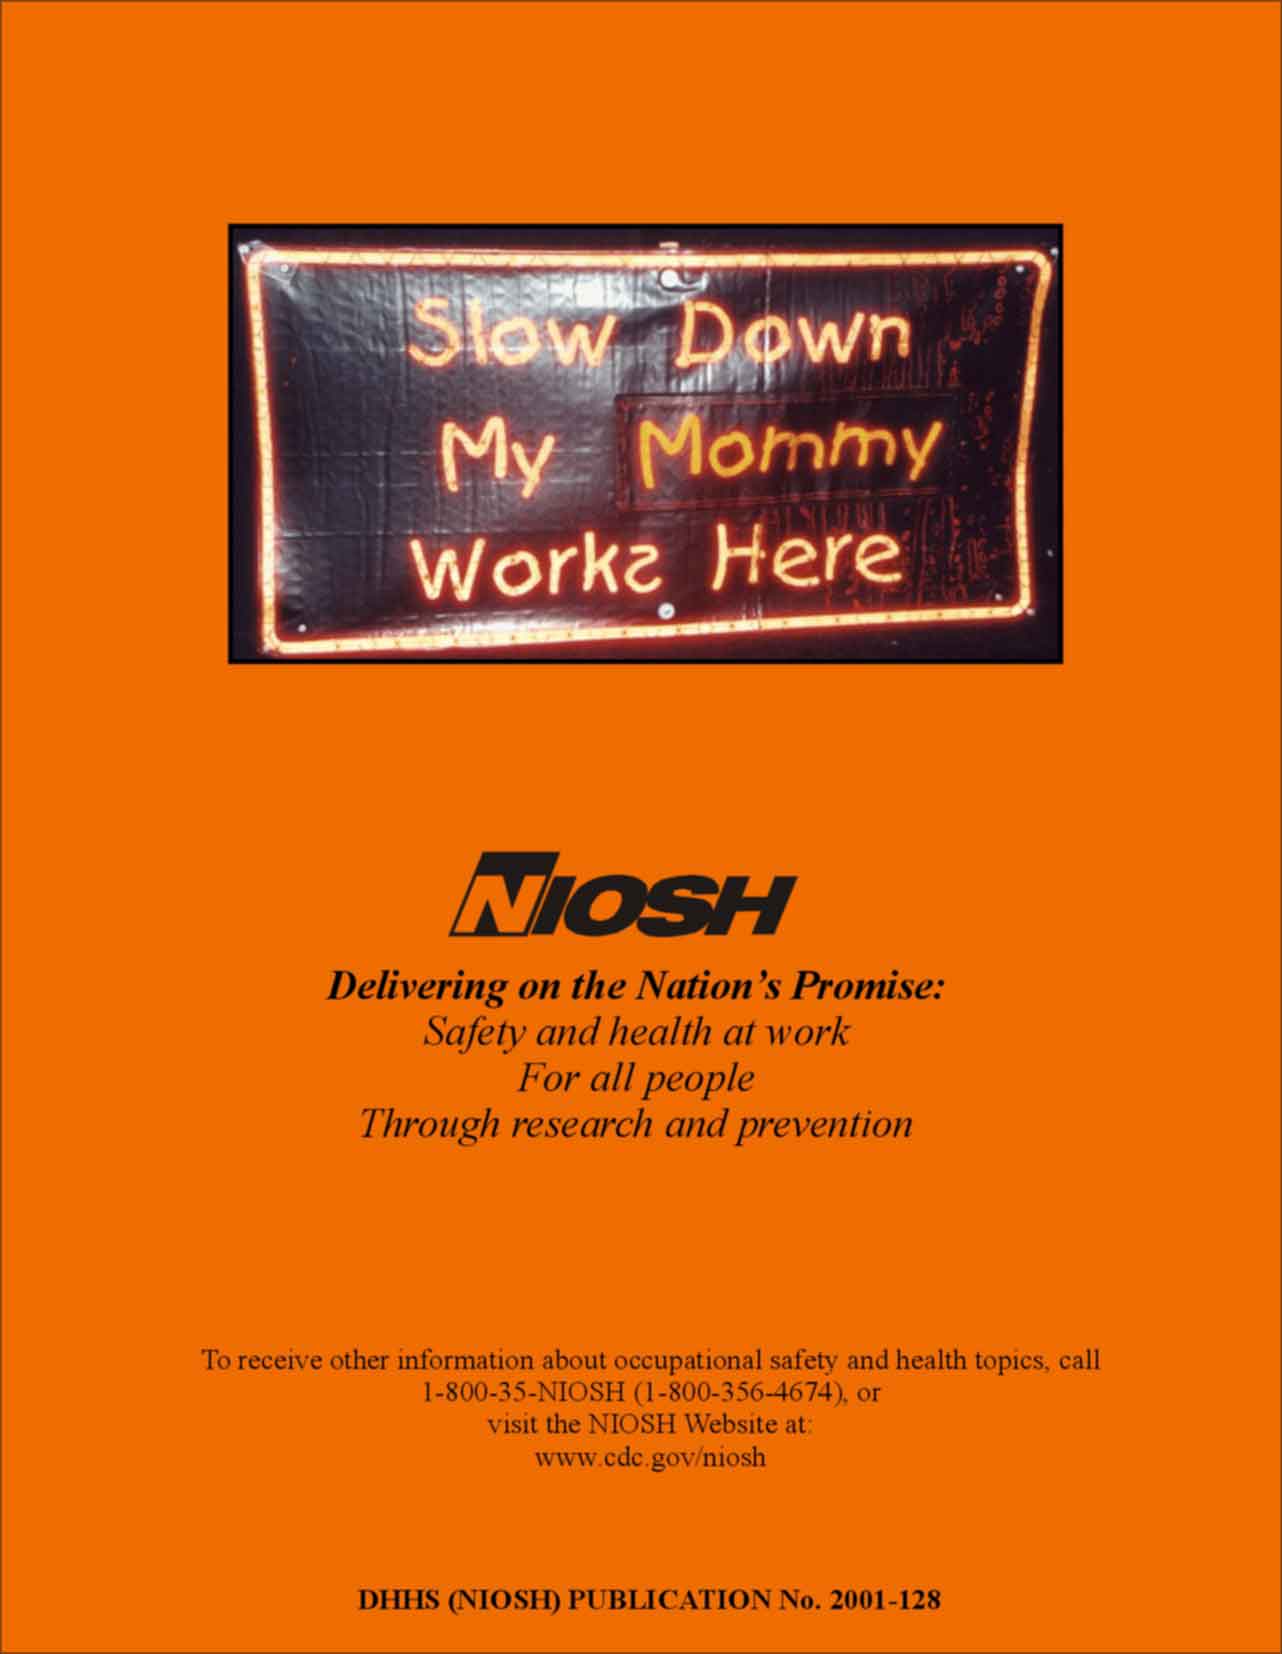 Road sign for construction area - Slow Down My Mommy Works Here